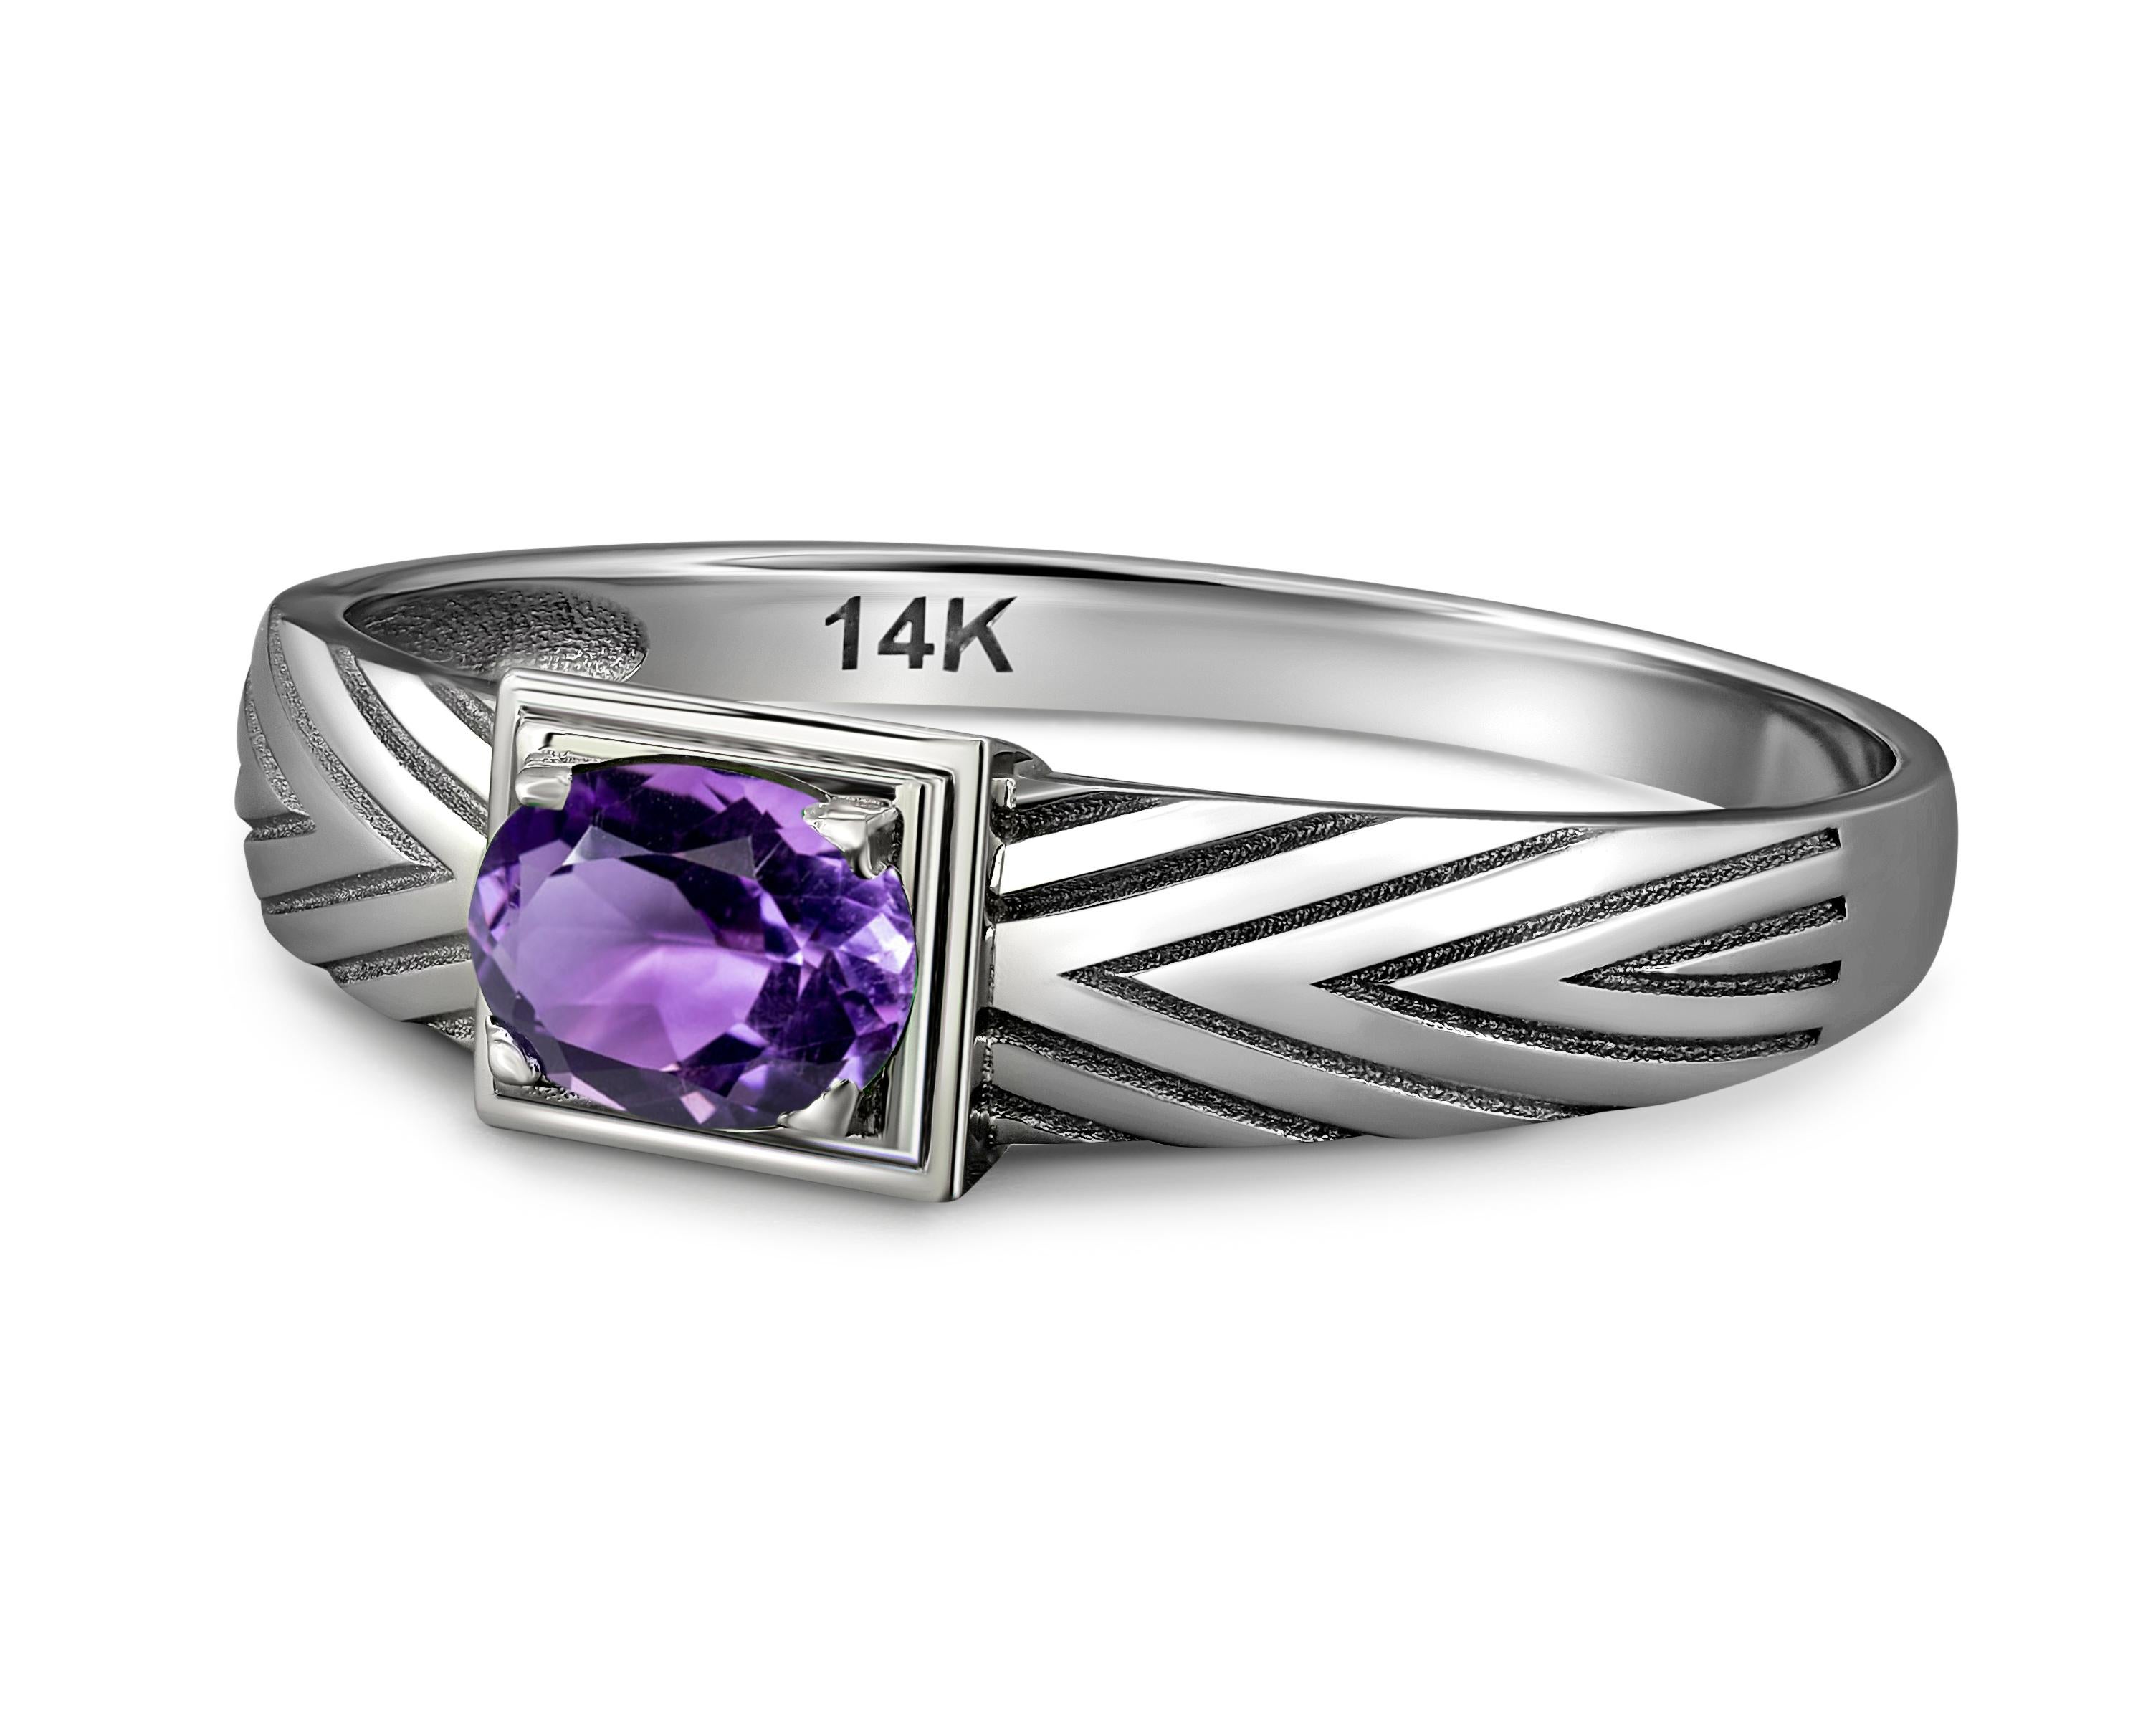 14K Gold Mens Ring with Amethyst. 
Gold ring for men with amethyst. Unisex ring with amethyst. Natural amethyst ring. Oval amethyst ring.

Metal: 14k gold
Total weight: 1.8 g. depends from ring size.

Central stone: Natural amethyst
Weight - approx